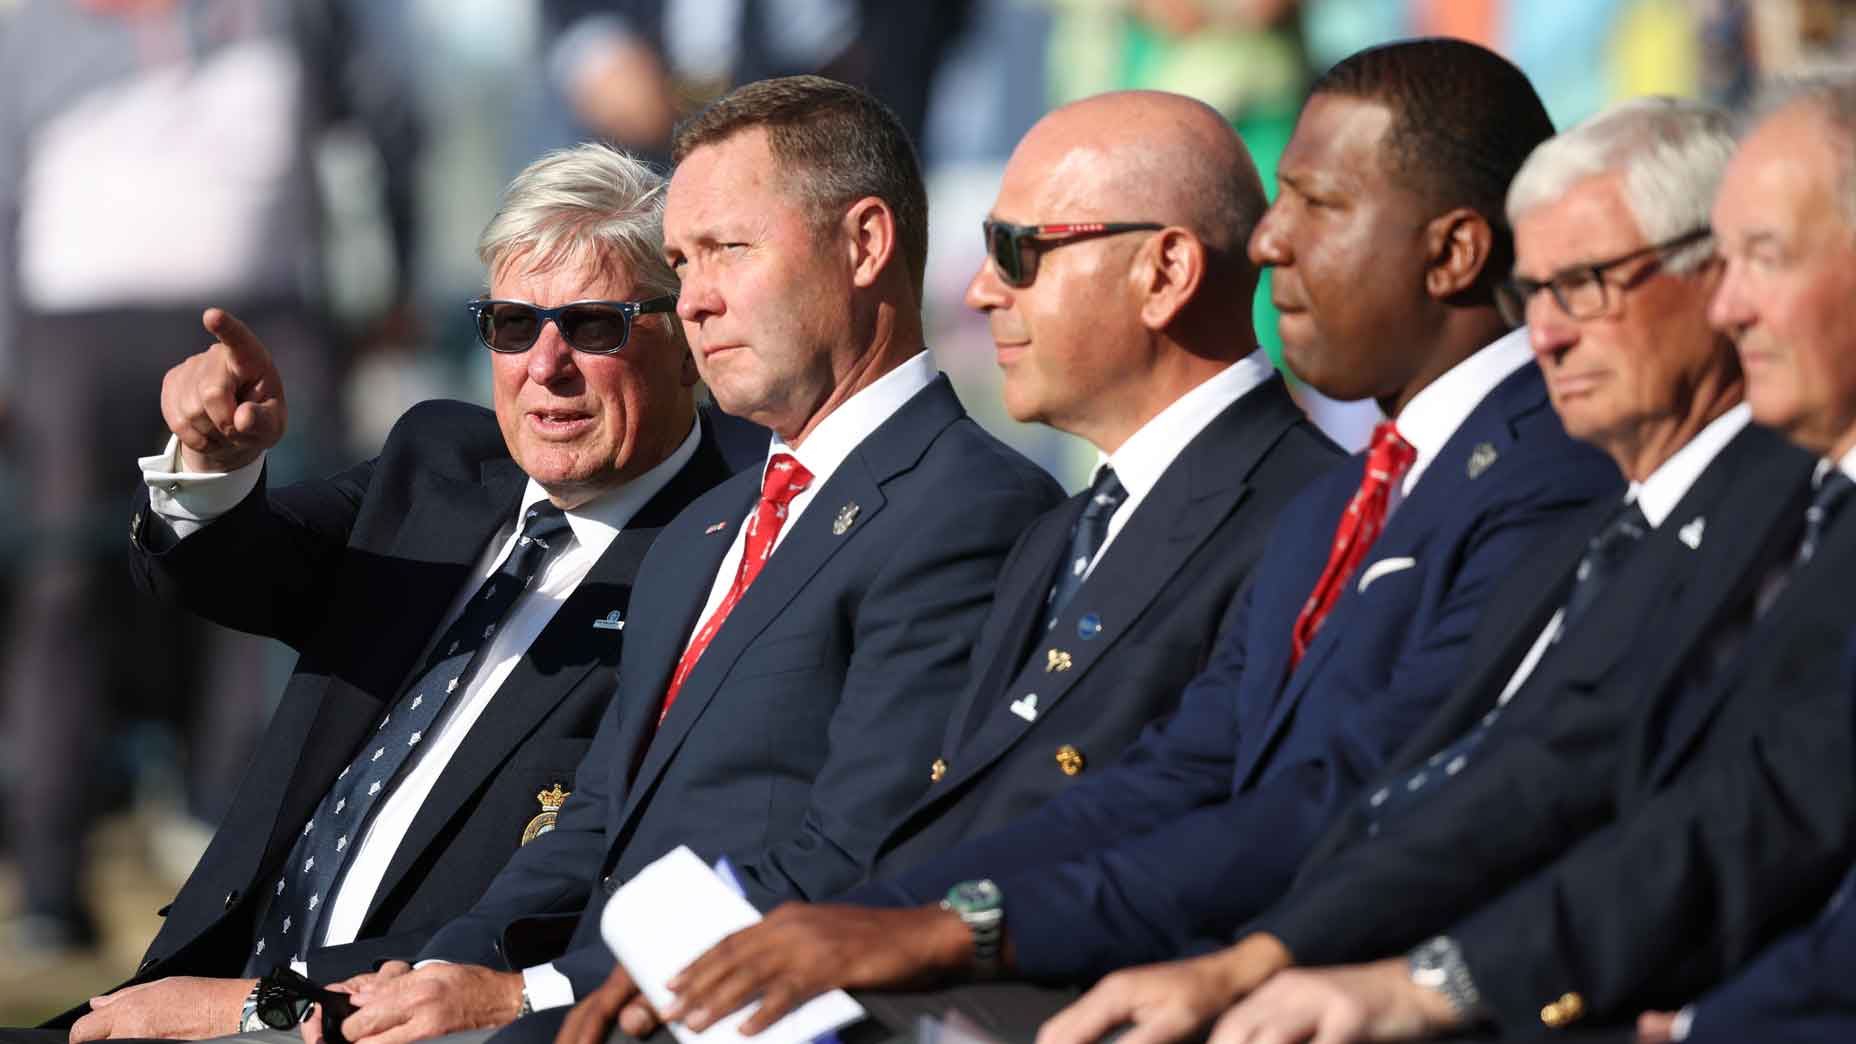 R&A Chief Executive Martin Slumbers & USGA Chief Executive Mike Whan sit together at the opening ceremony prior to the Walker Cup at St Andrews Old Course on September 1, 2023 in St Andrews, Scotland.